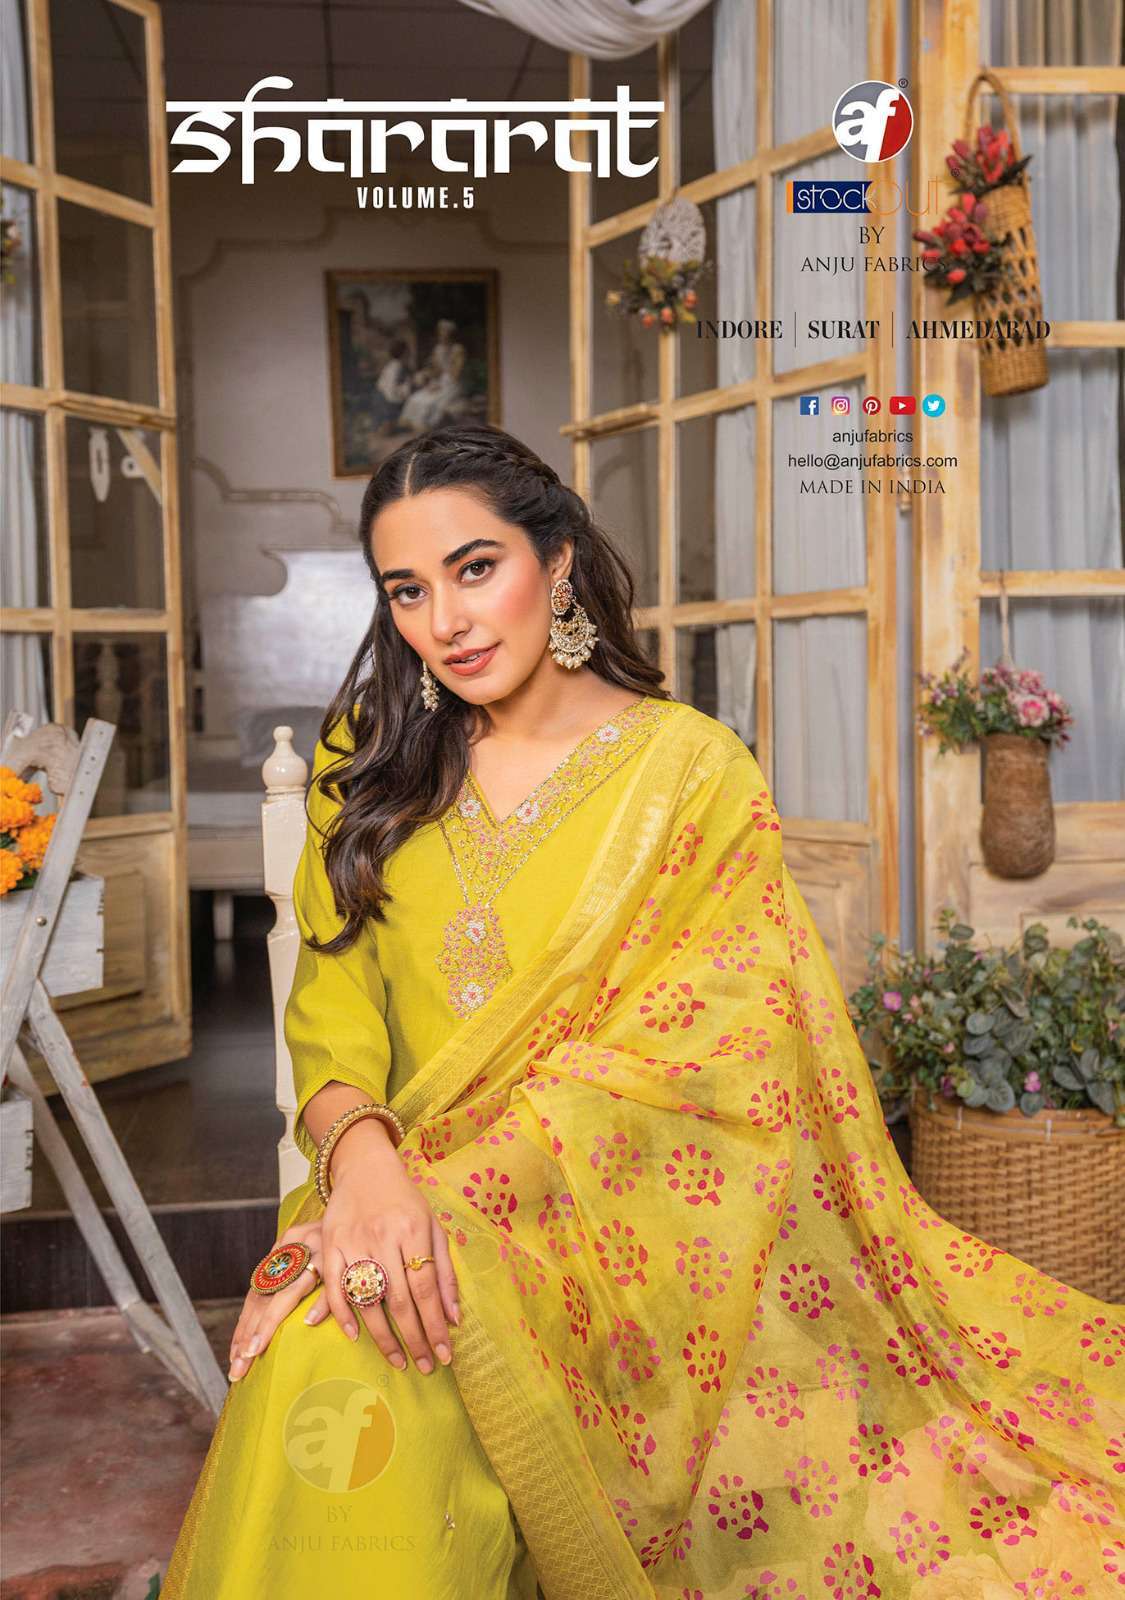 Af Stock Out Shararat Vol 5 By Anju Fabrics Casual Wear 3 Piece Set Suppliers